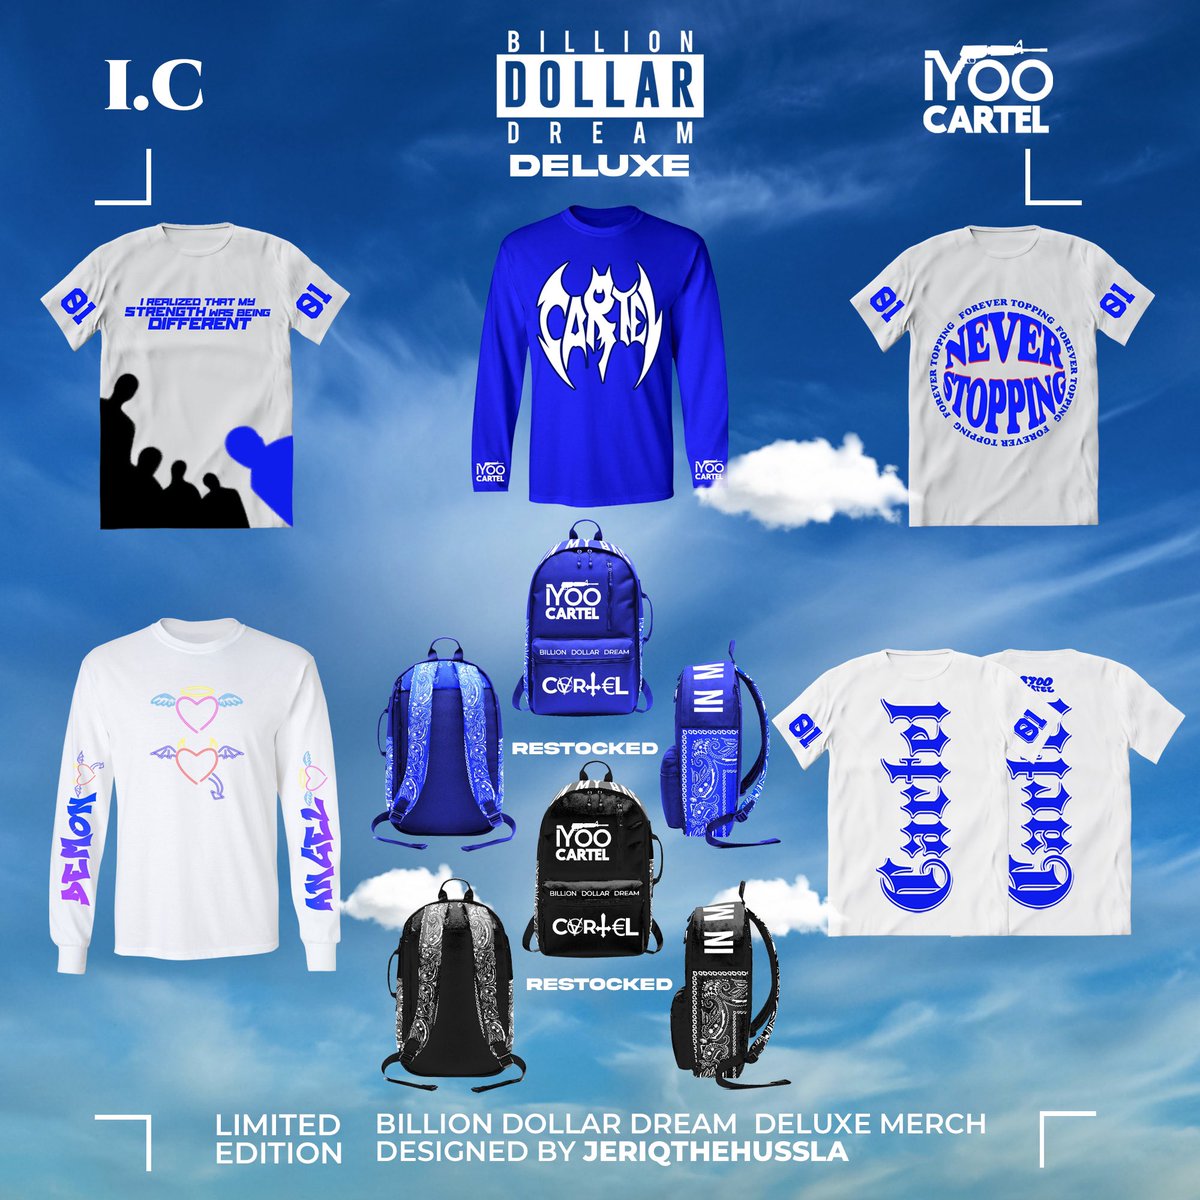 SITE NOW OPEN FOR THE BDDDELUXE MERCH 🛸💙 *WORLDWIDE SHIPPING** SHIPS WITHIN 3-7 BUSINESS DAYS** DONT DULL ,BE ACTIVE. SEND DIS TO UR BRO,BABE, MUMZIE, UNCLEZ, AUNTIEZ, OPPZ AND TELL EM YOU WANT THE DRIP 💧 ⚠️⬇️🛸 IYOOCARTEL.COM